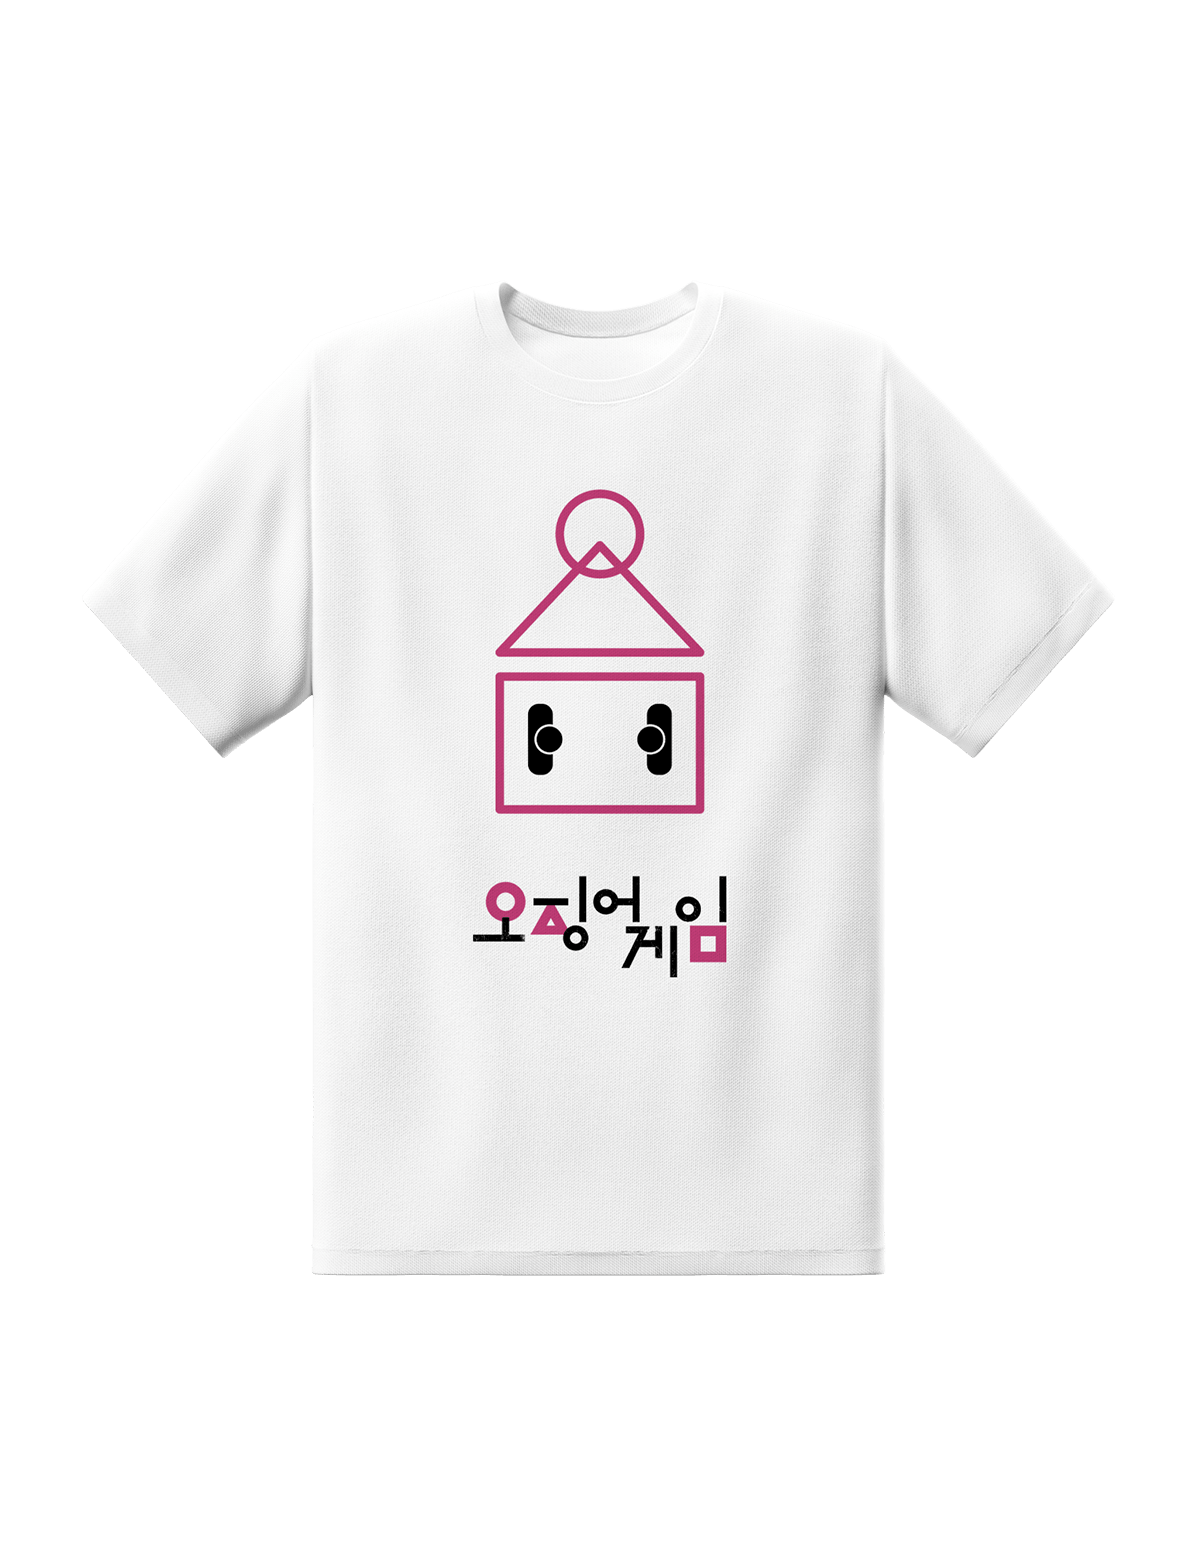 SQUID GAME ARENA WHITE T-SHIRT BY GFXT3CH